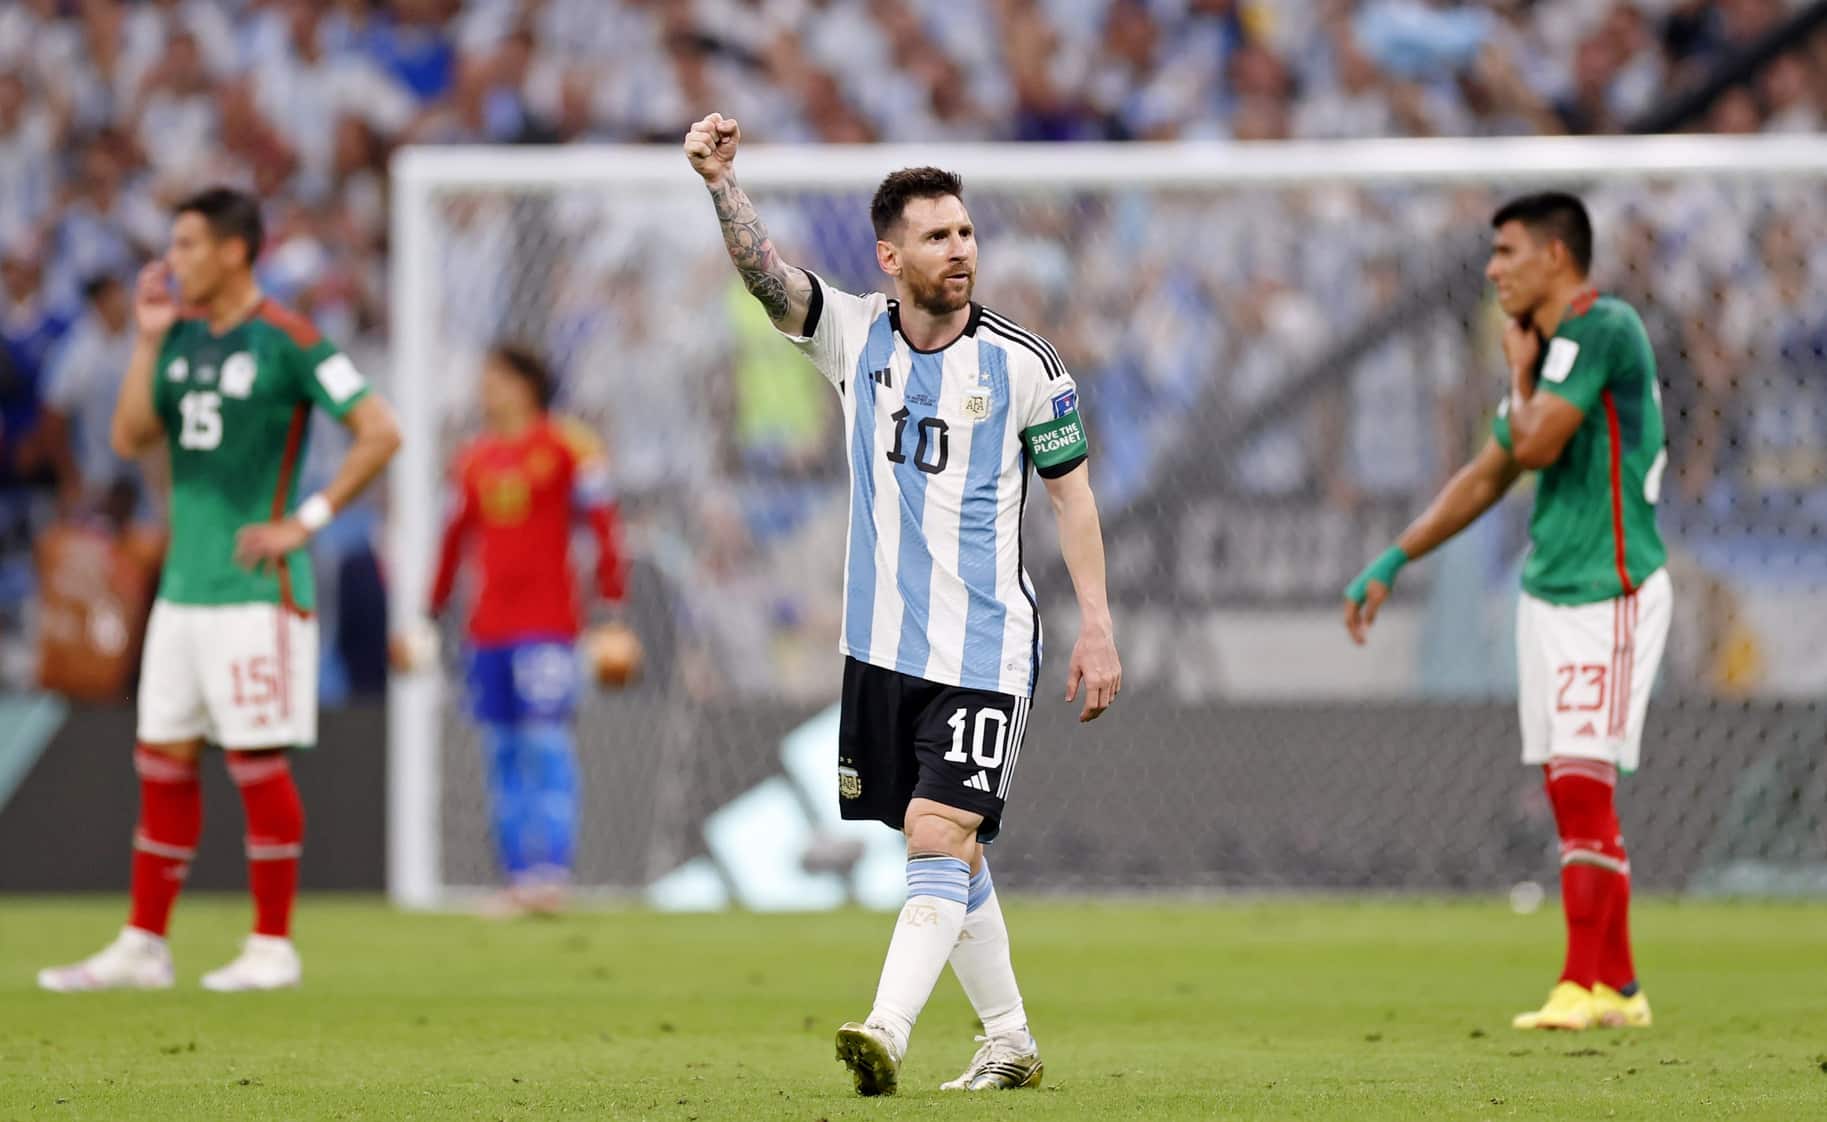 Messi raises fist in celebration during World Cup match against Mexico